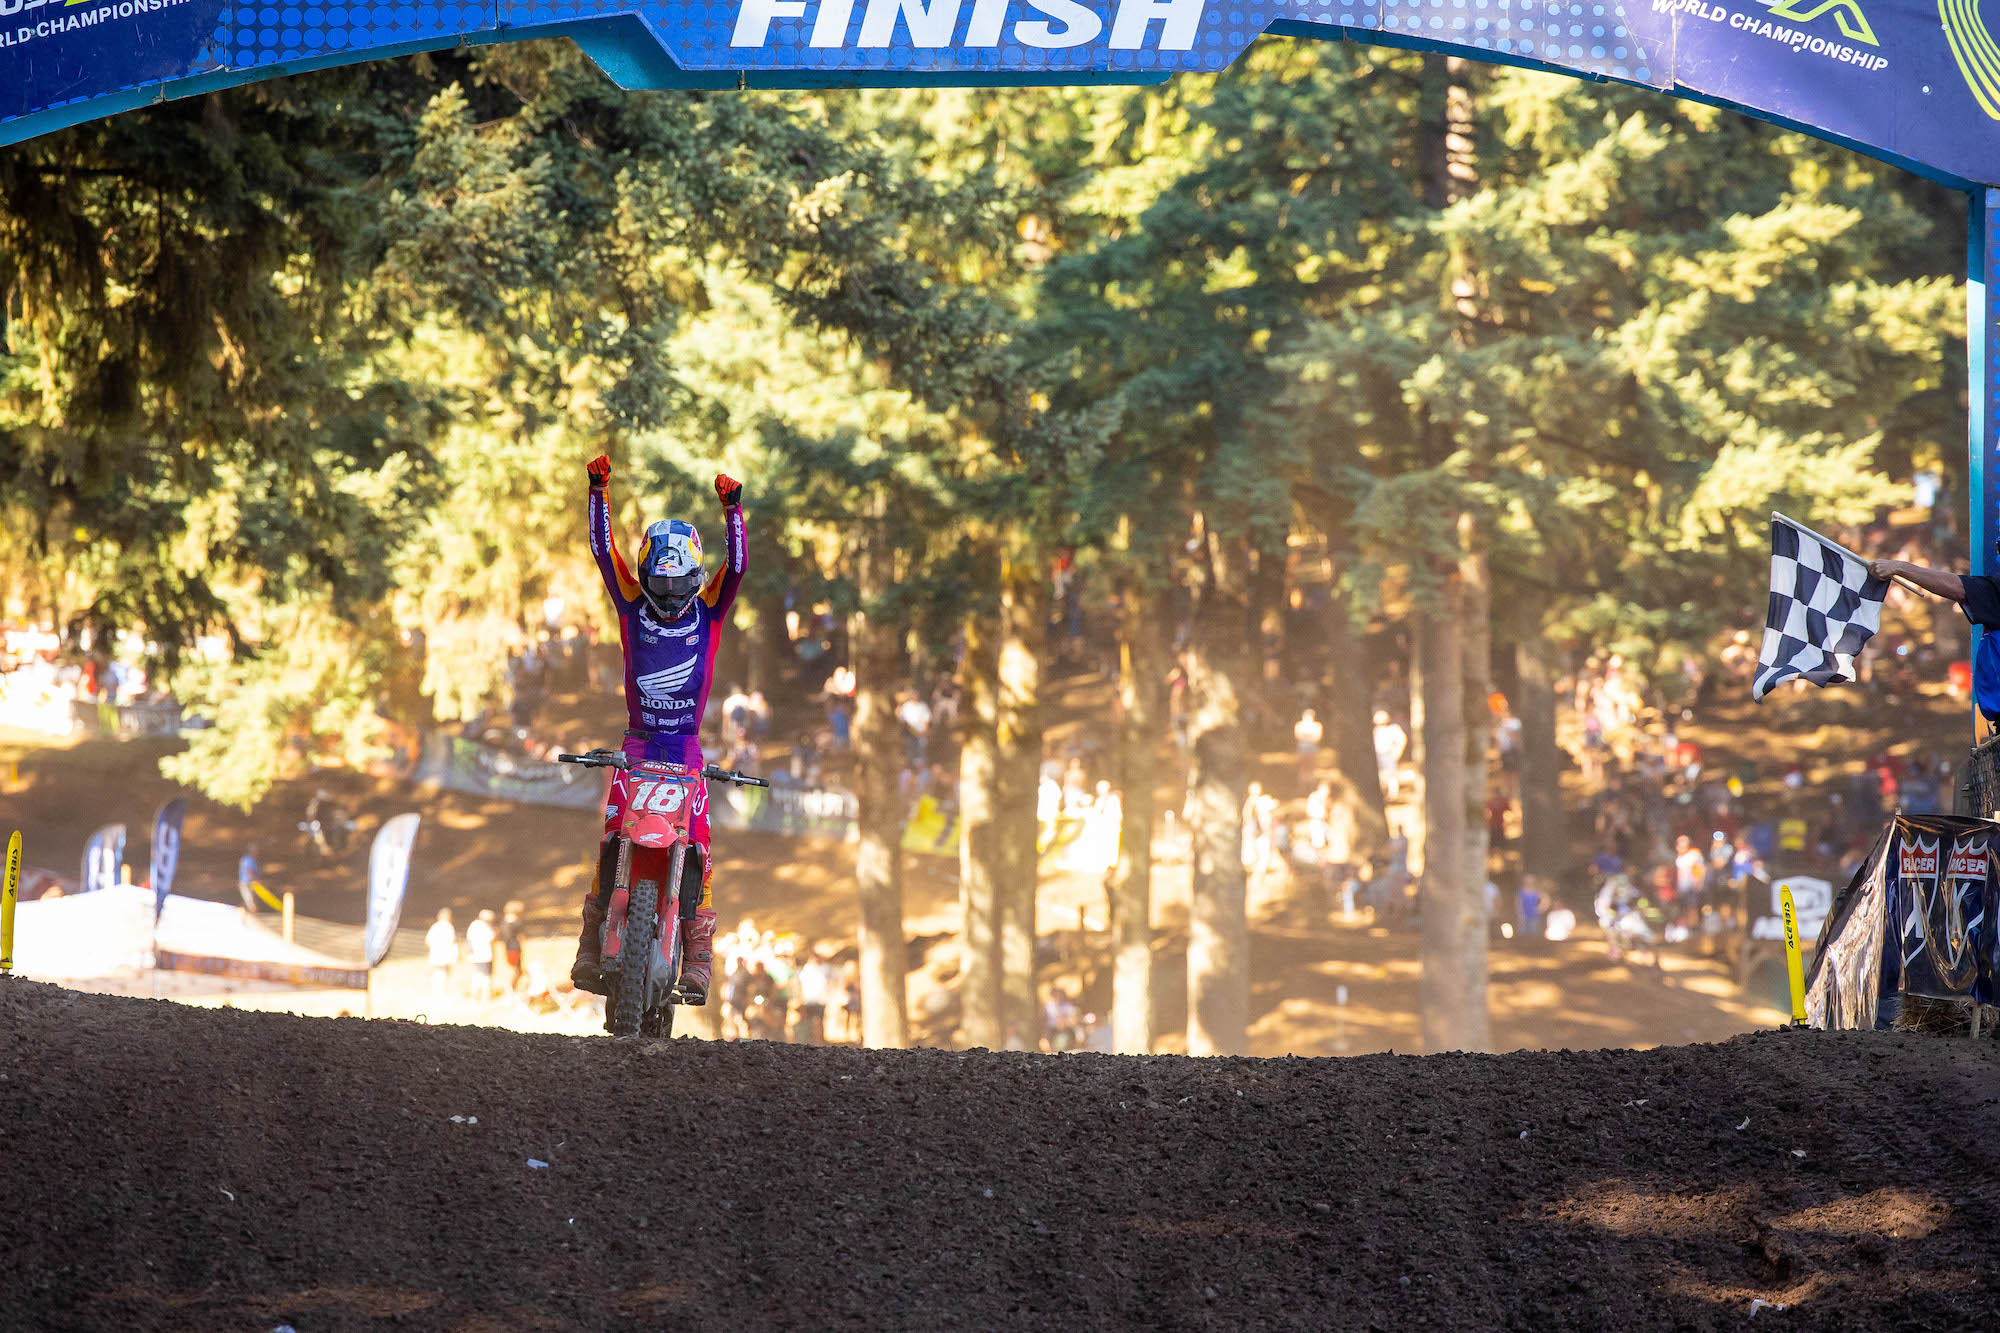 Another 1-1 at Washougal Extends Jett Lawrence’s Perfect Season Through Eight Rounds in 2023 Pro Motocross Championship